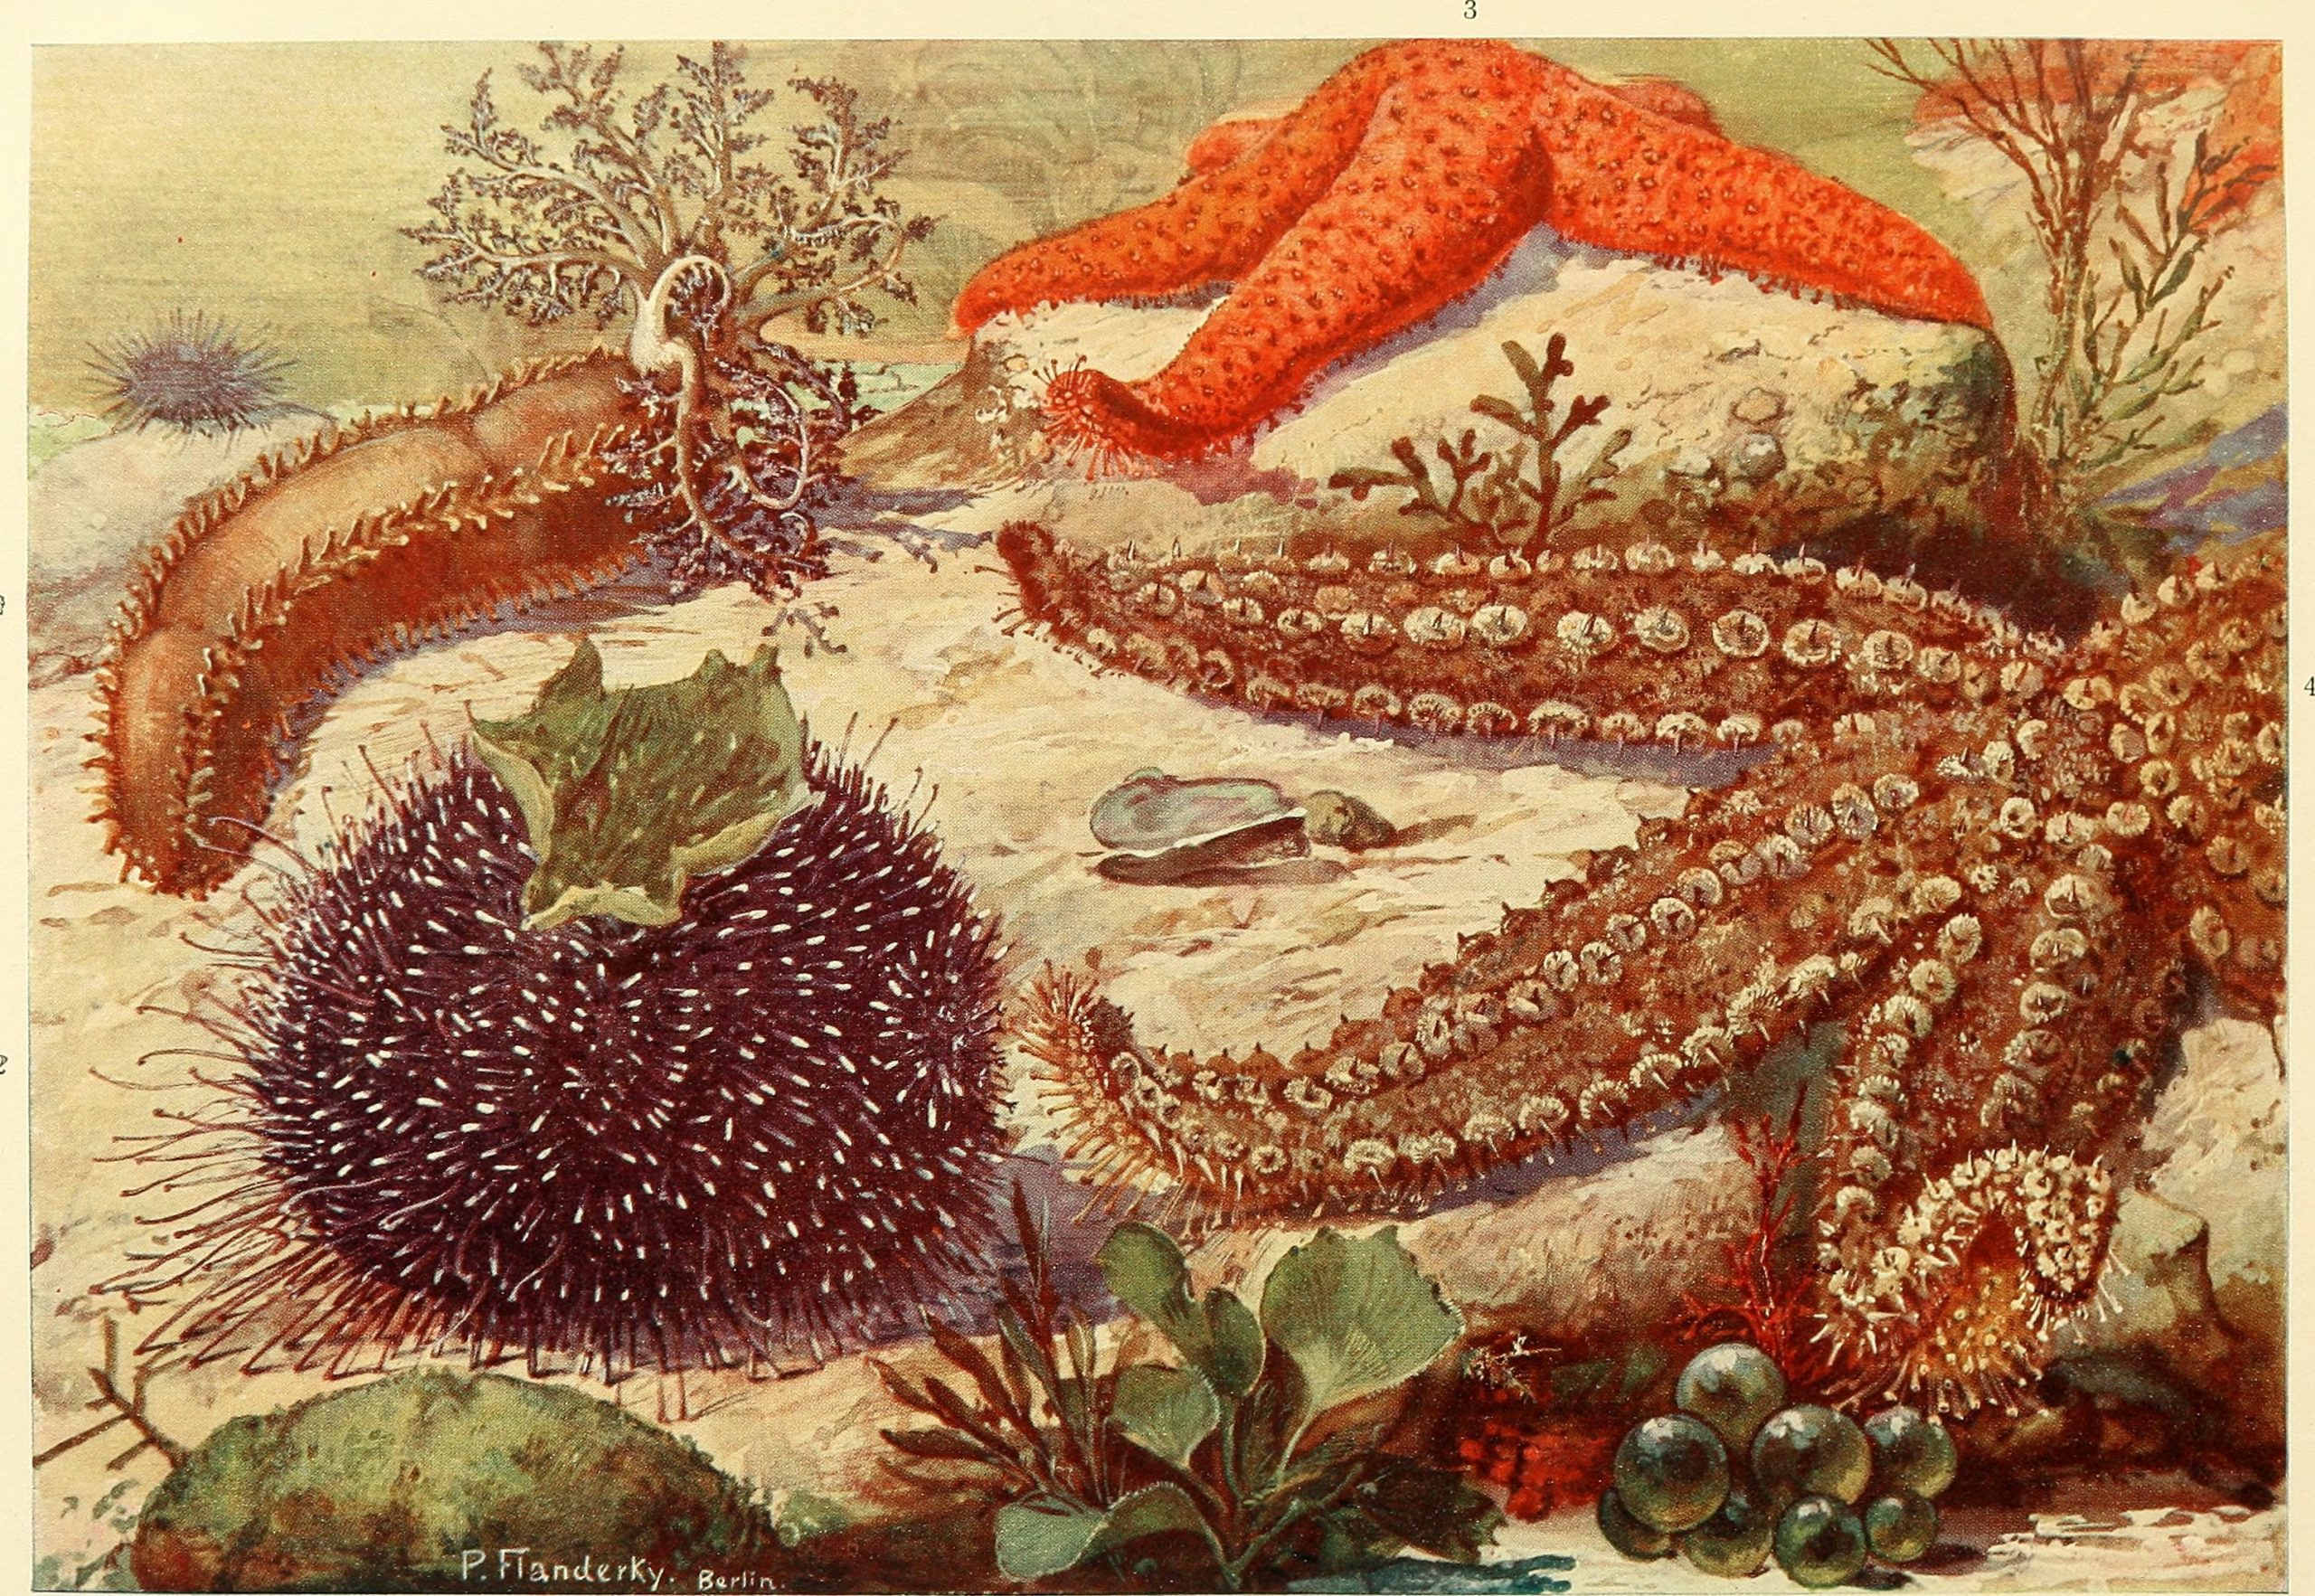 A sea cucumber, urchin, and starfish on a seabed